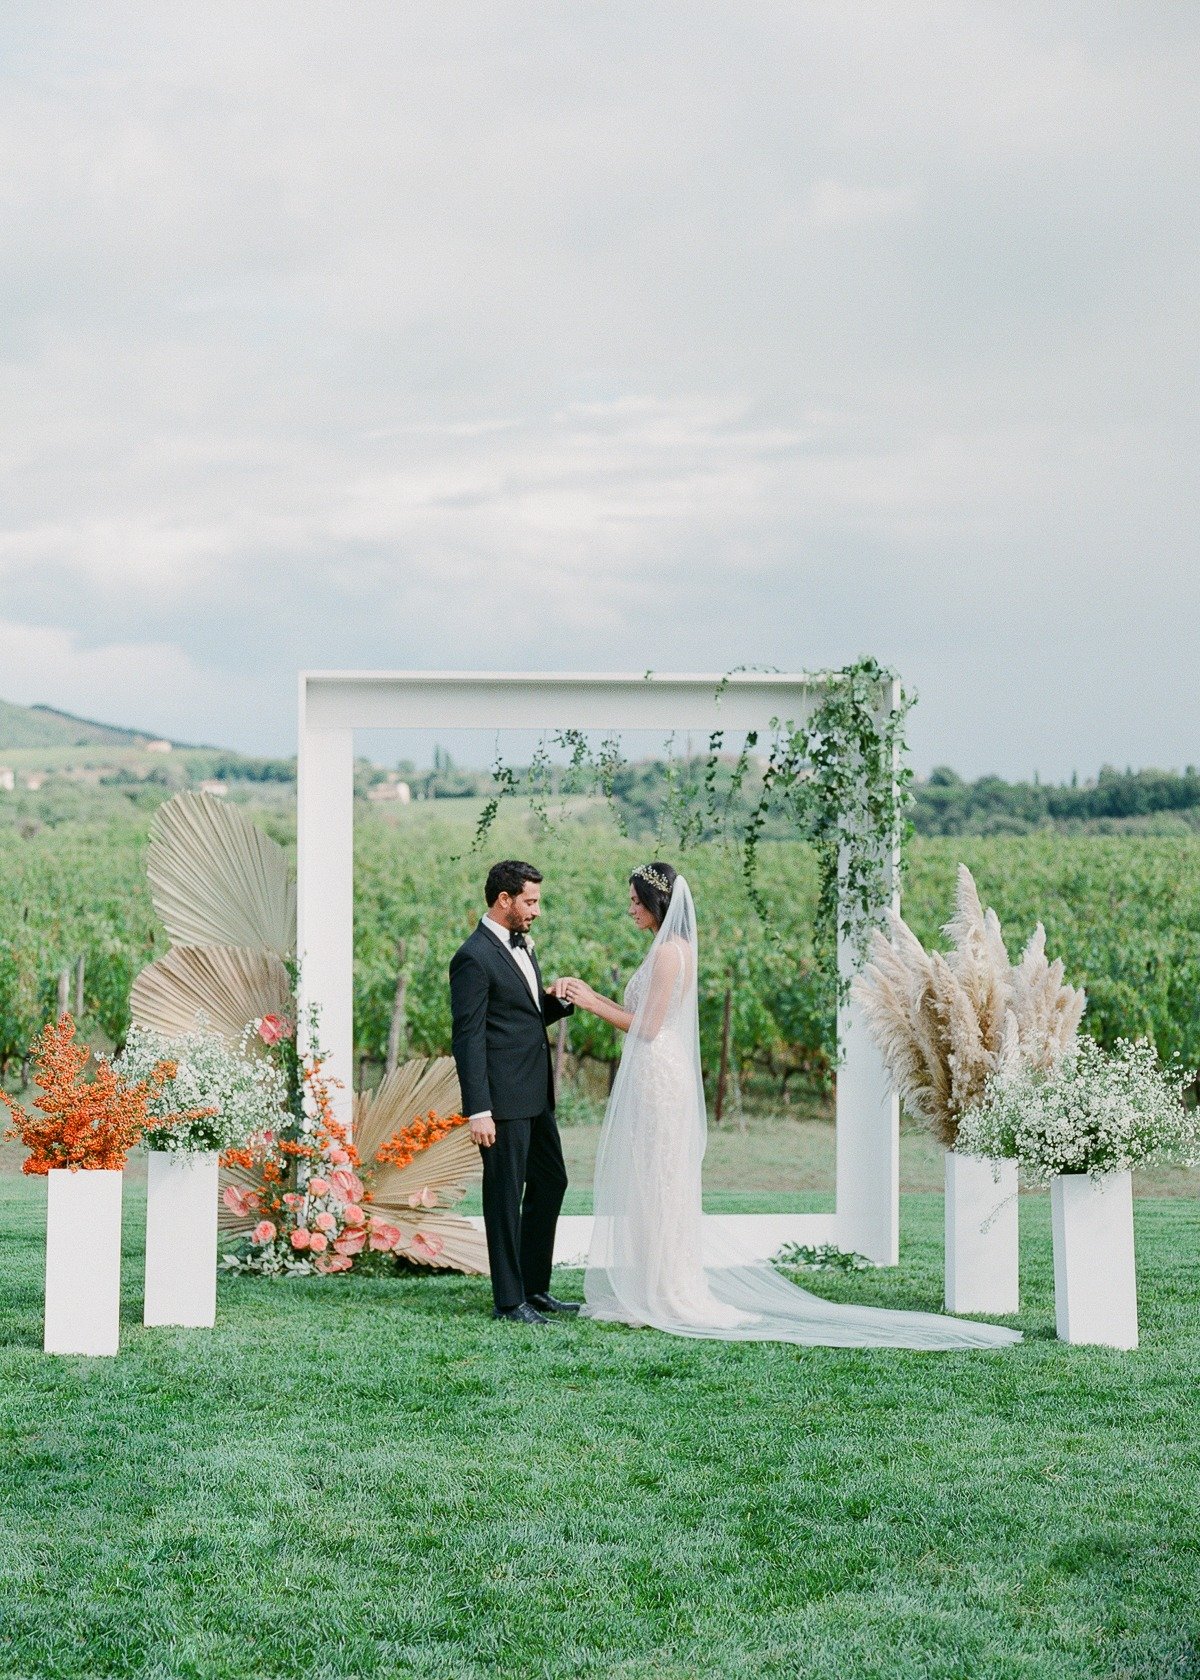 Redefining Sustainability One Wedding At A Time